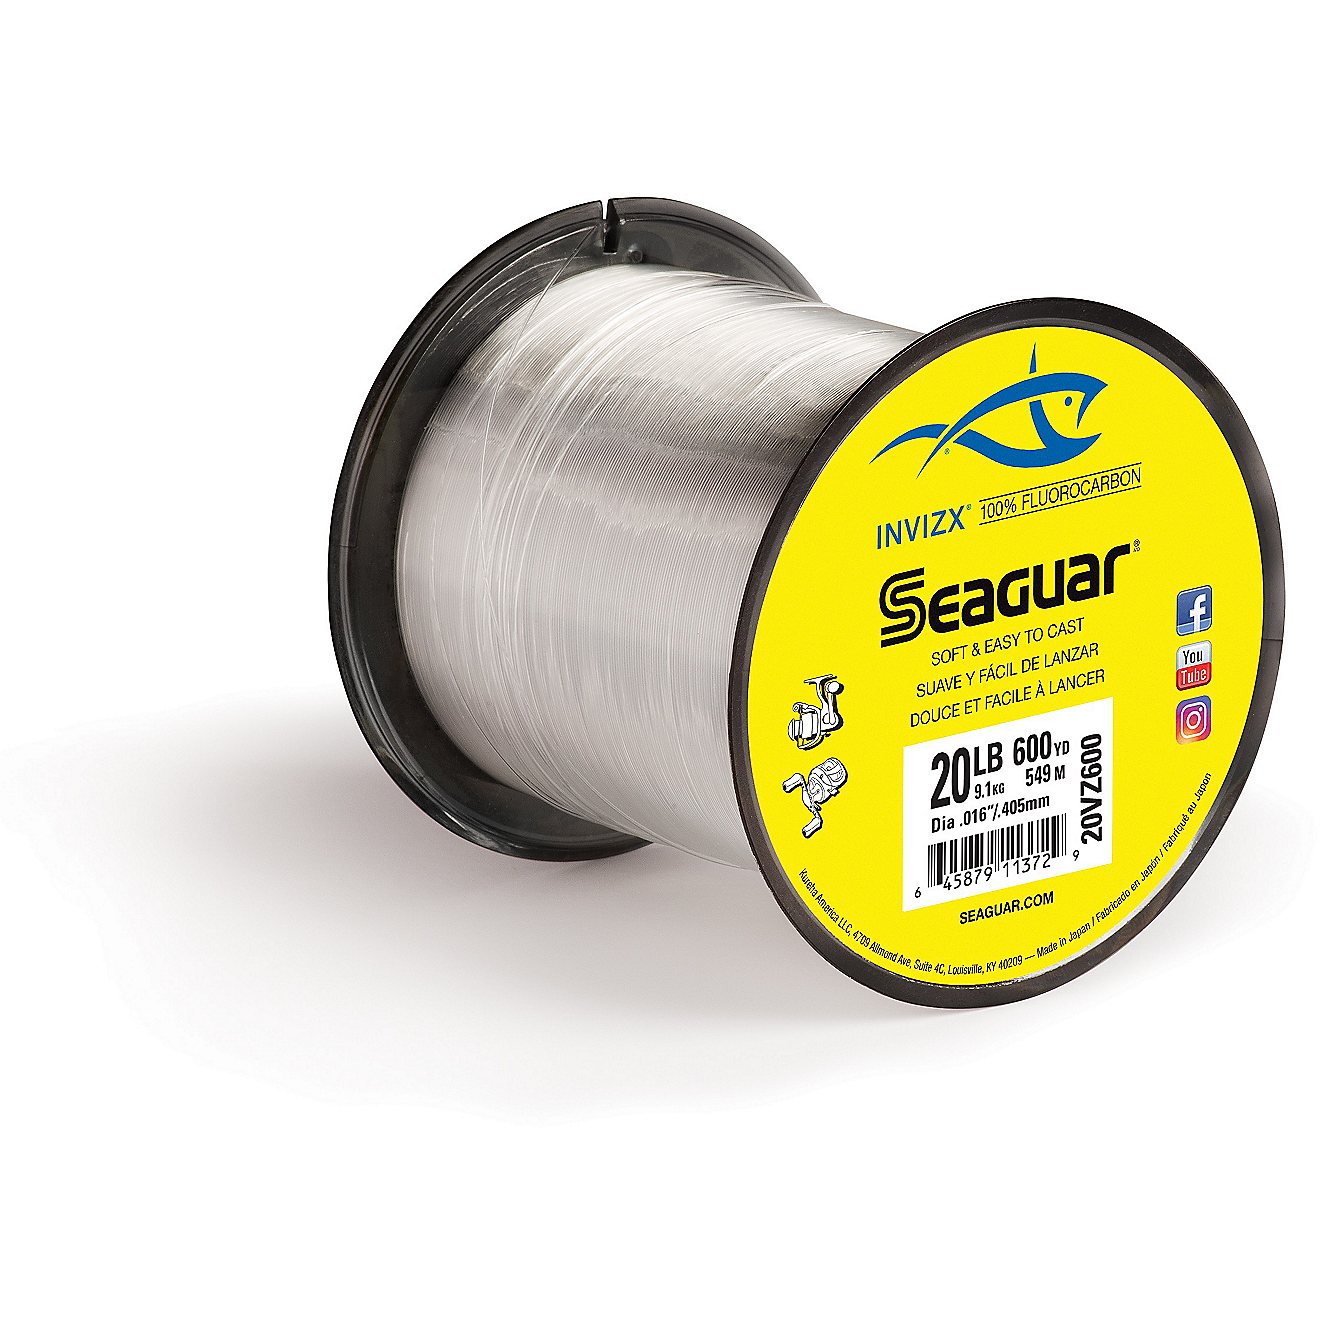 Seaguar INVIZX 600 yd Fluorocarbon Fishing Line                                                                                  - view number 1